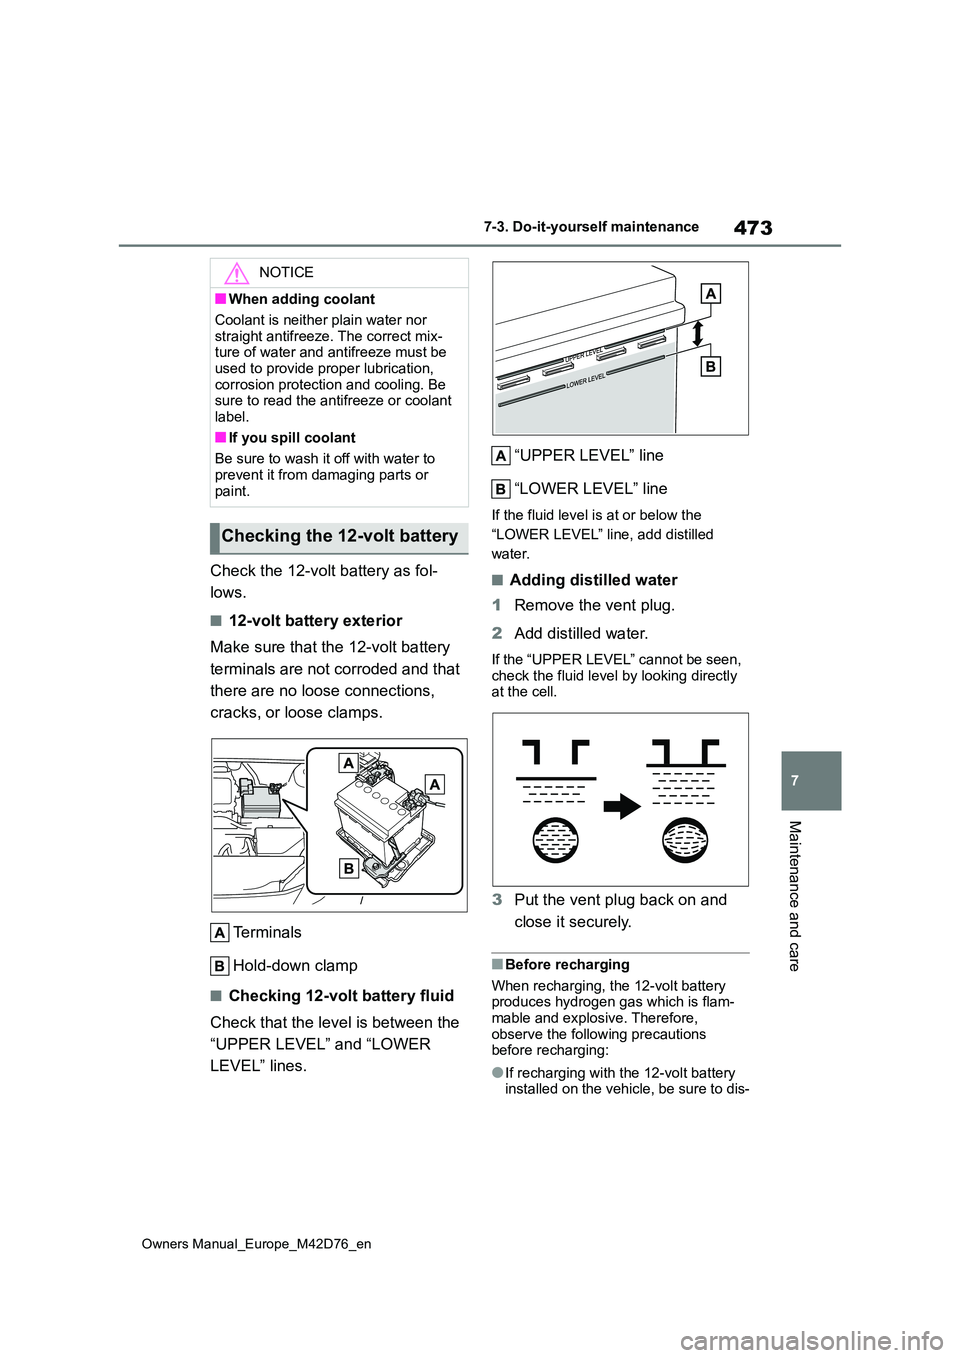 TOYOTA BZ4X 2022  Owners Manual (in English) 473
7
Owners Manual_Europe_M42D76_en
7-3. Do-it-yourself maintenance
Maintenance and care
Check the 12-volt battery as fol- 
lows.
■12-volt battery exterior 
Make sure that the 12-volt battery  
ter